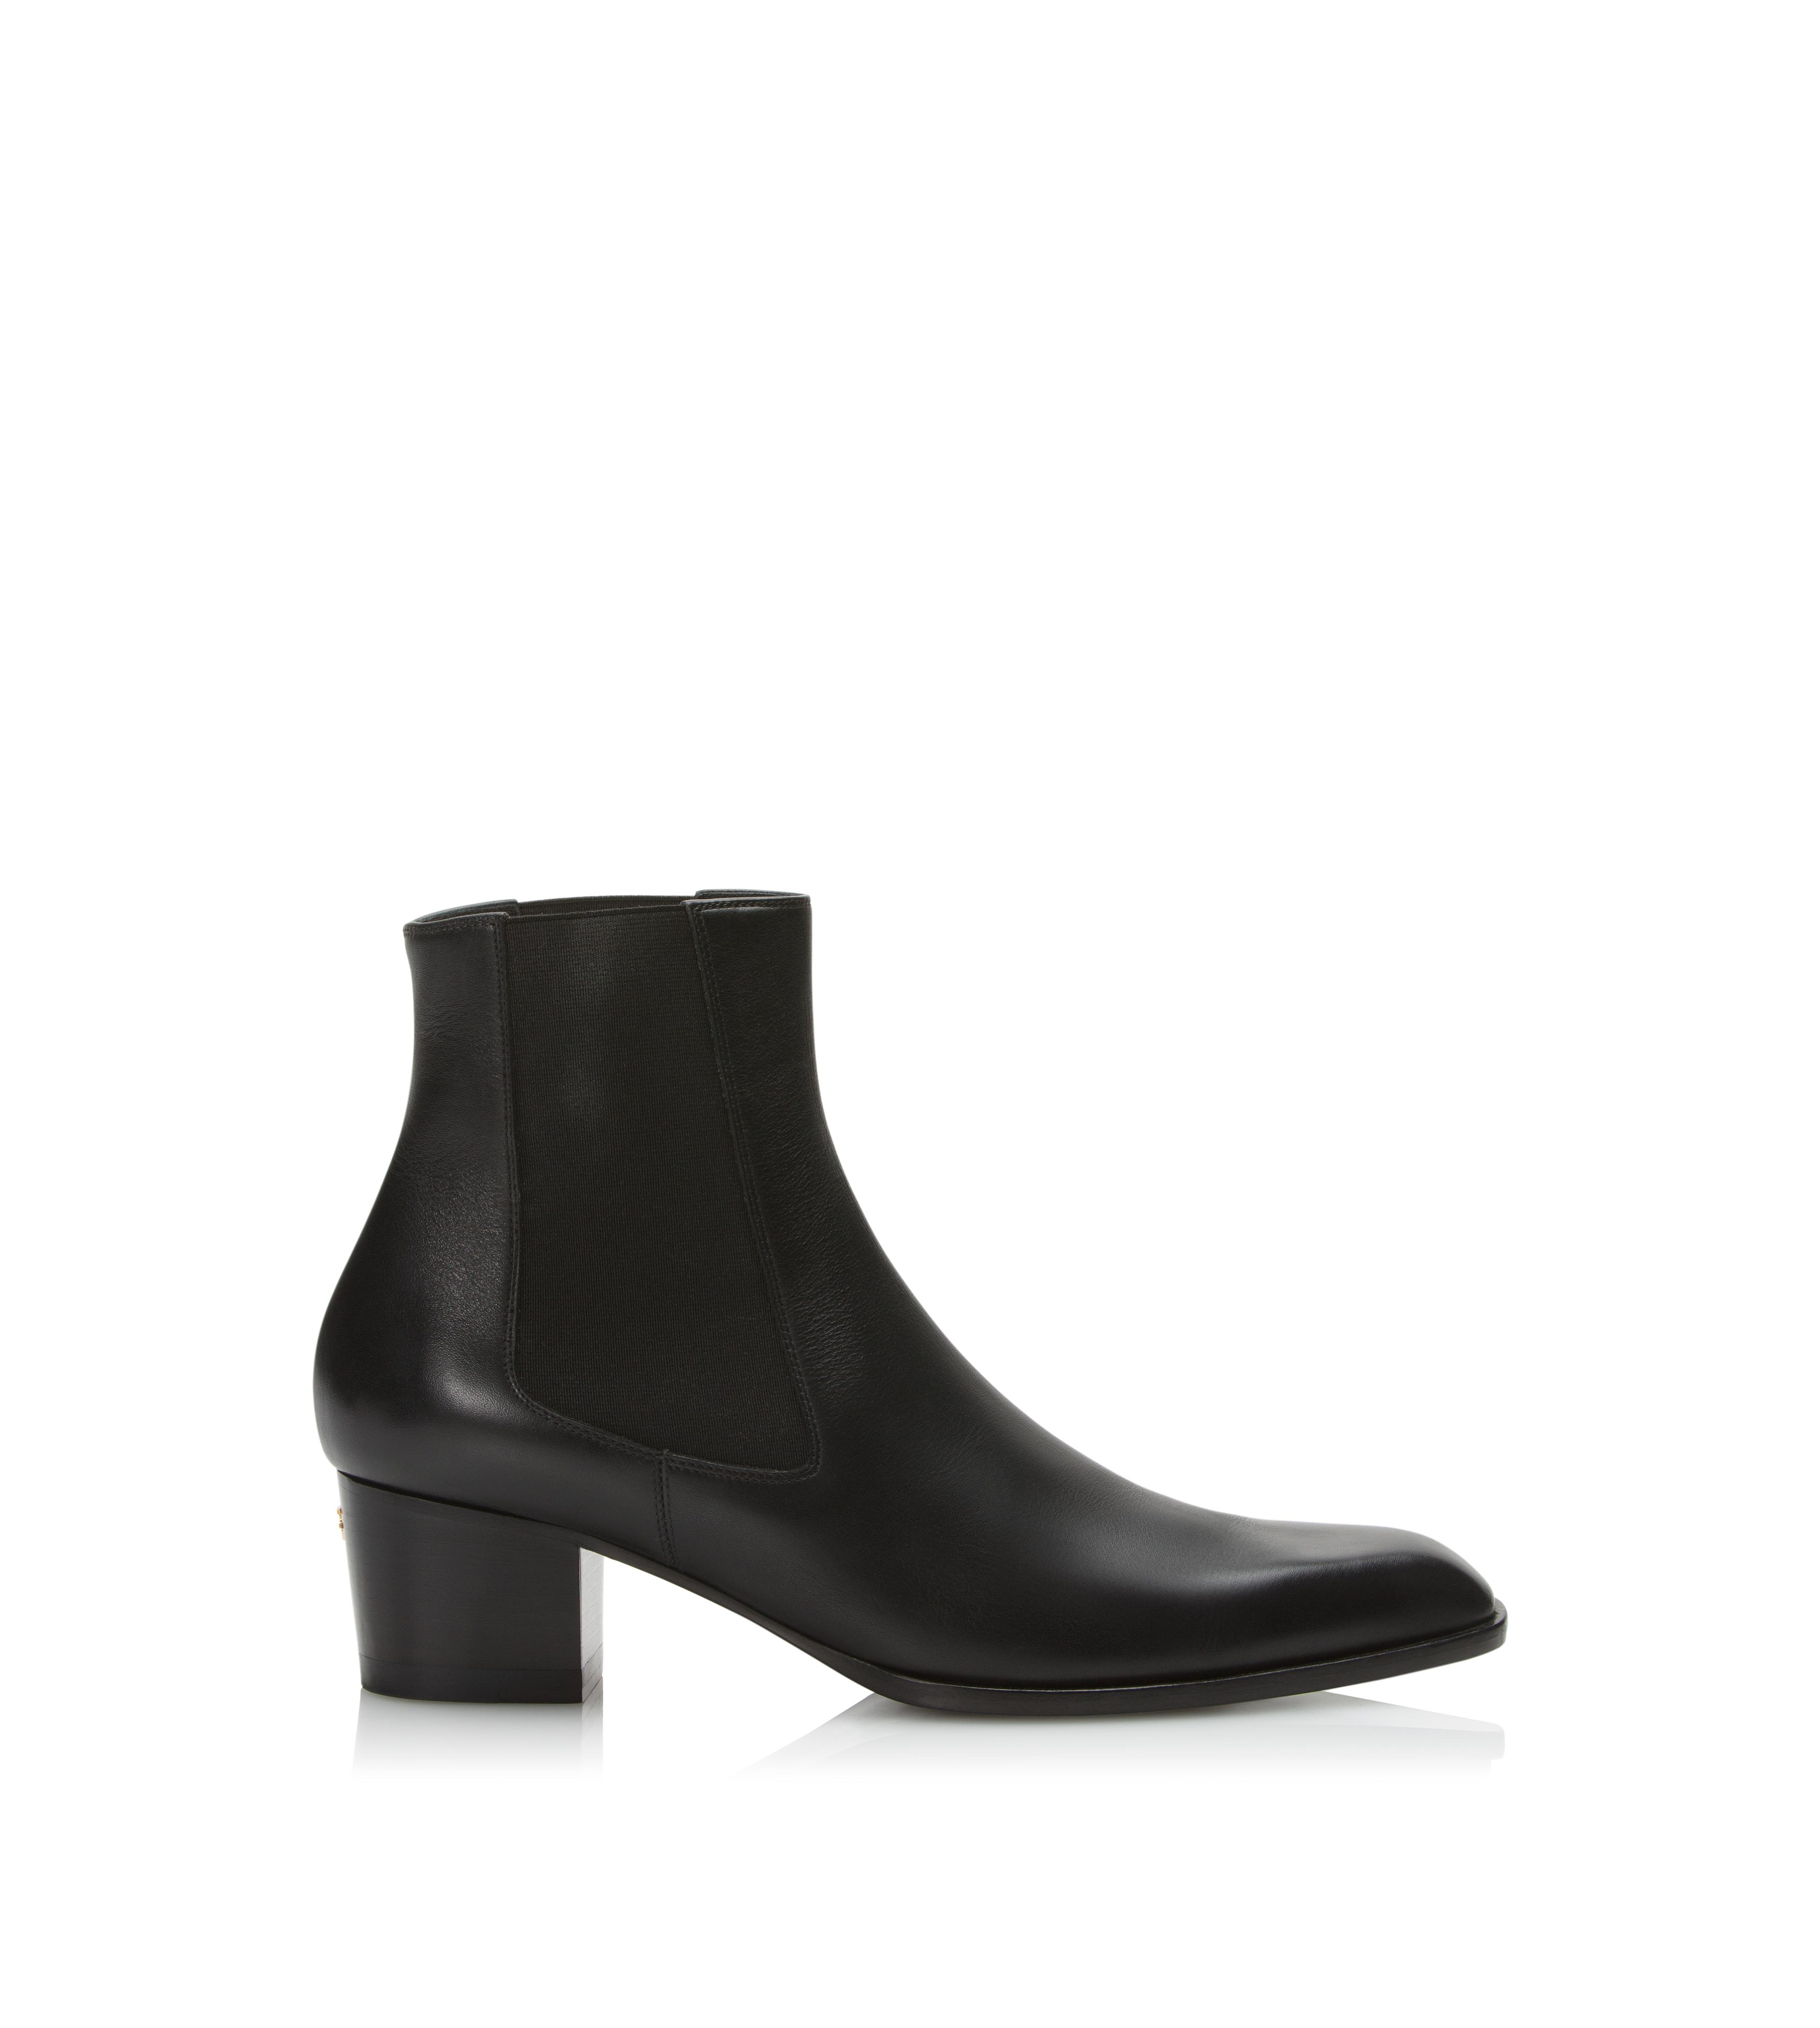 tom ford women's boots